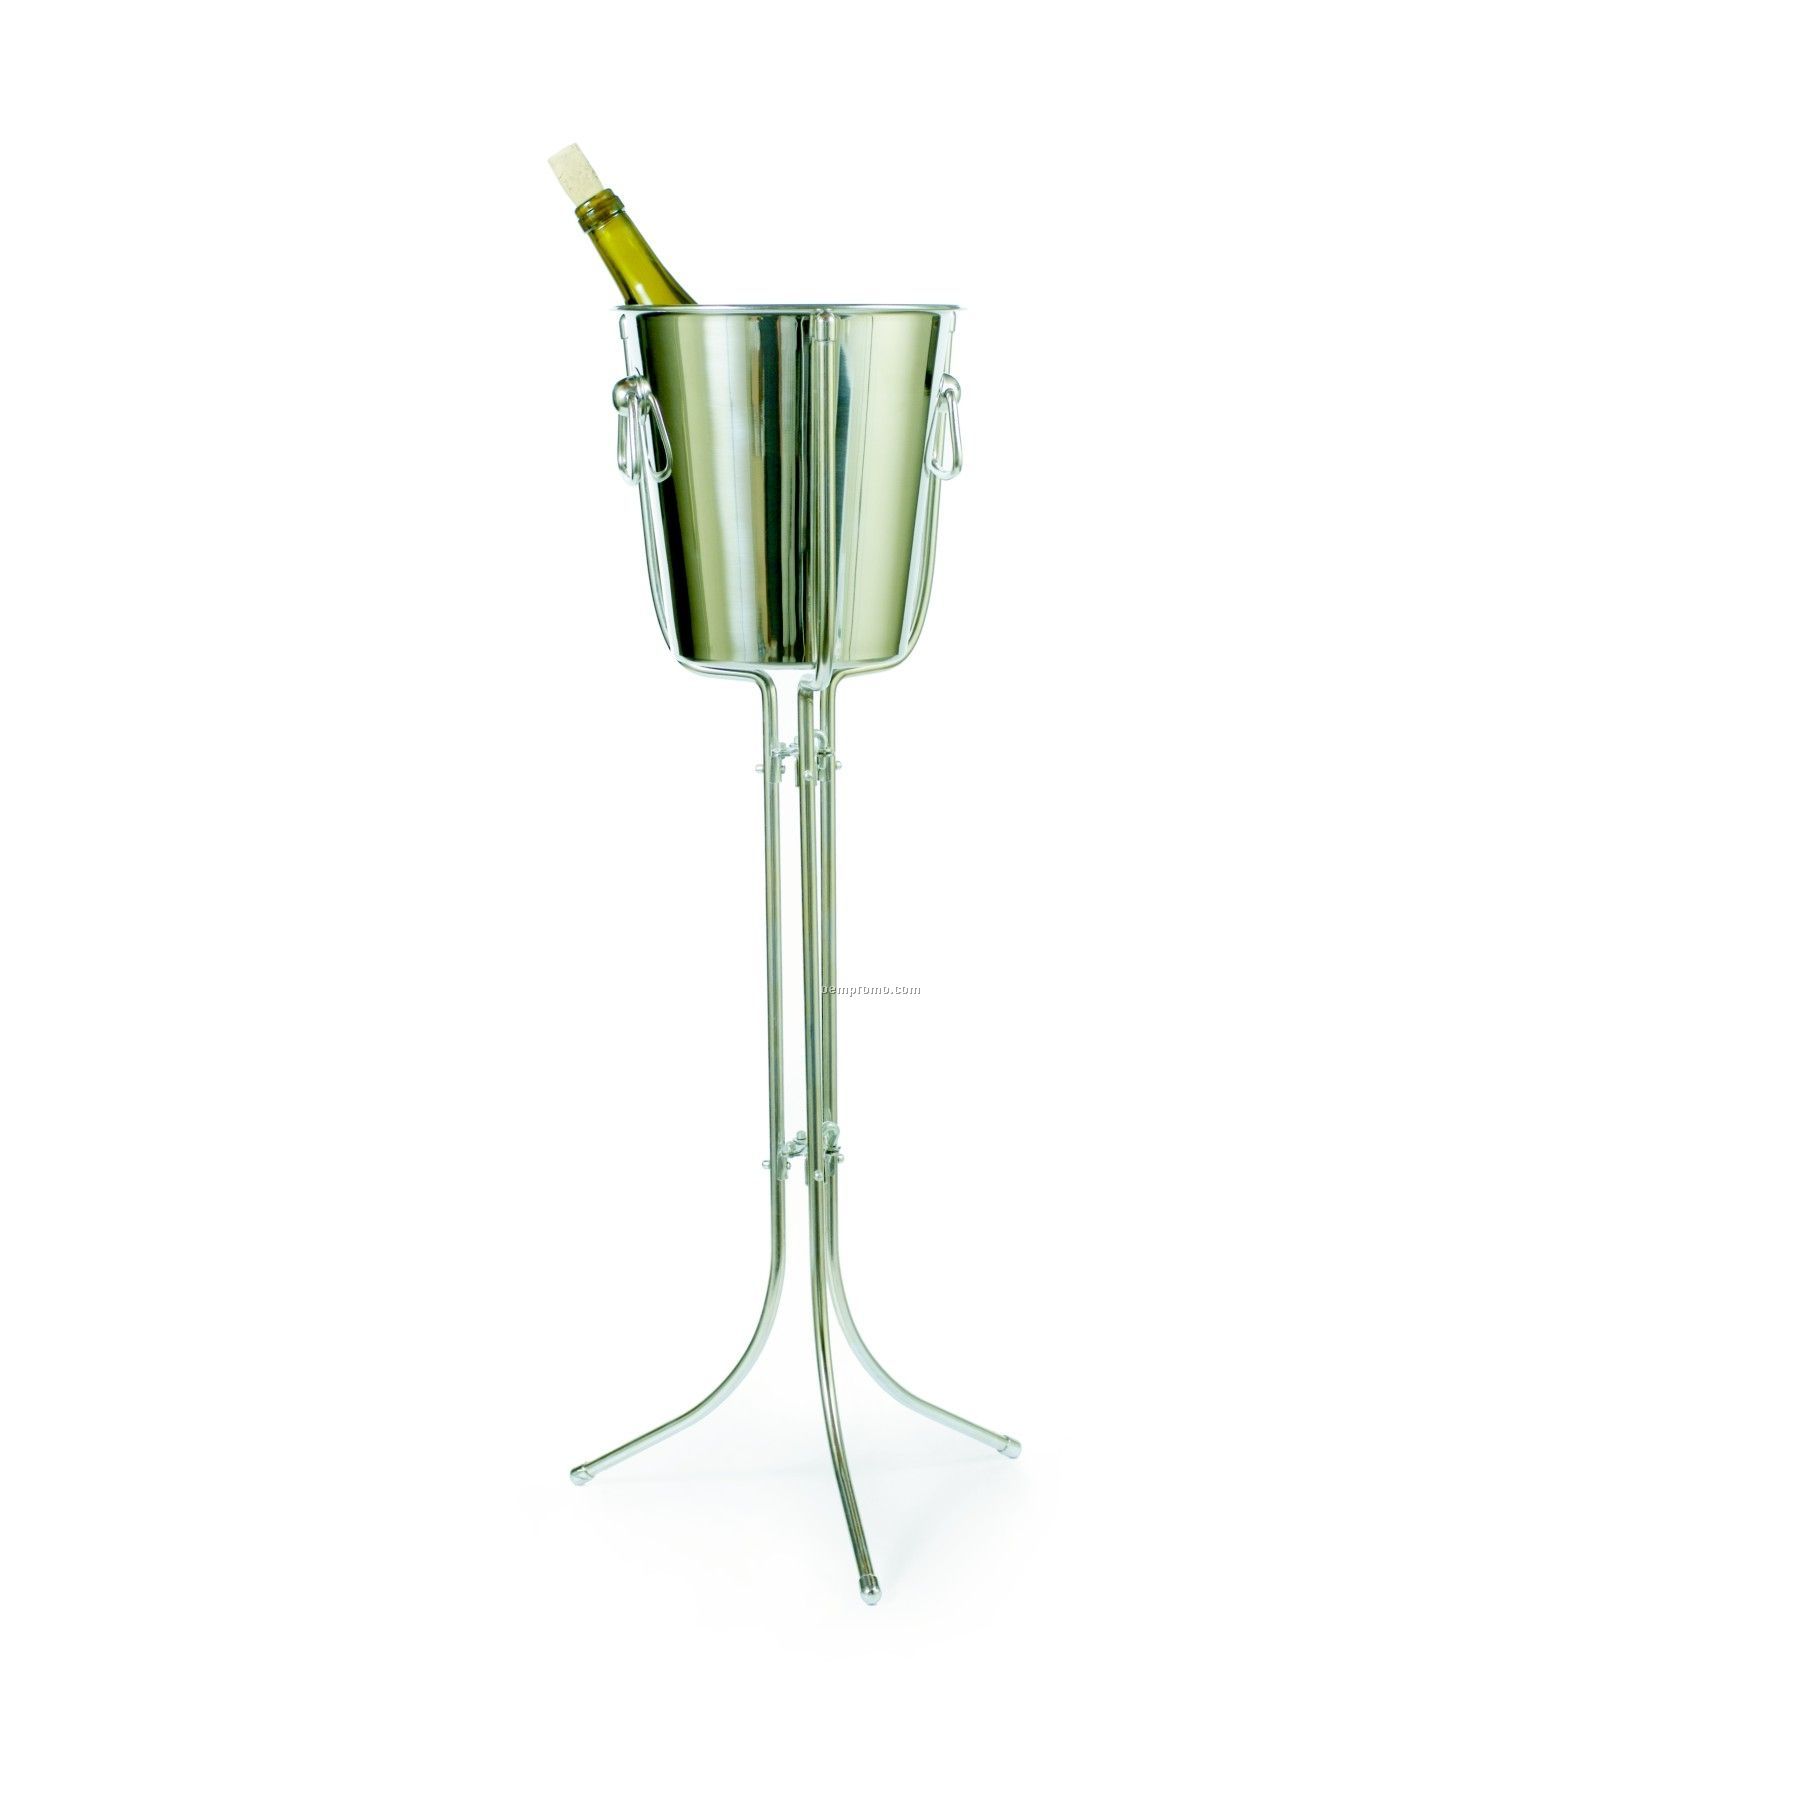 Three Leg Wine Stand For Ideal Stainless Steel Wine & Champagne Chiller